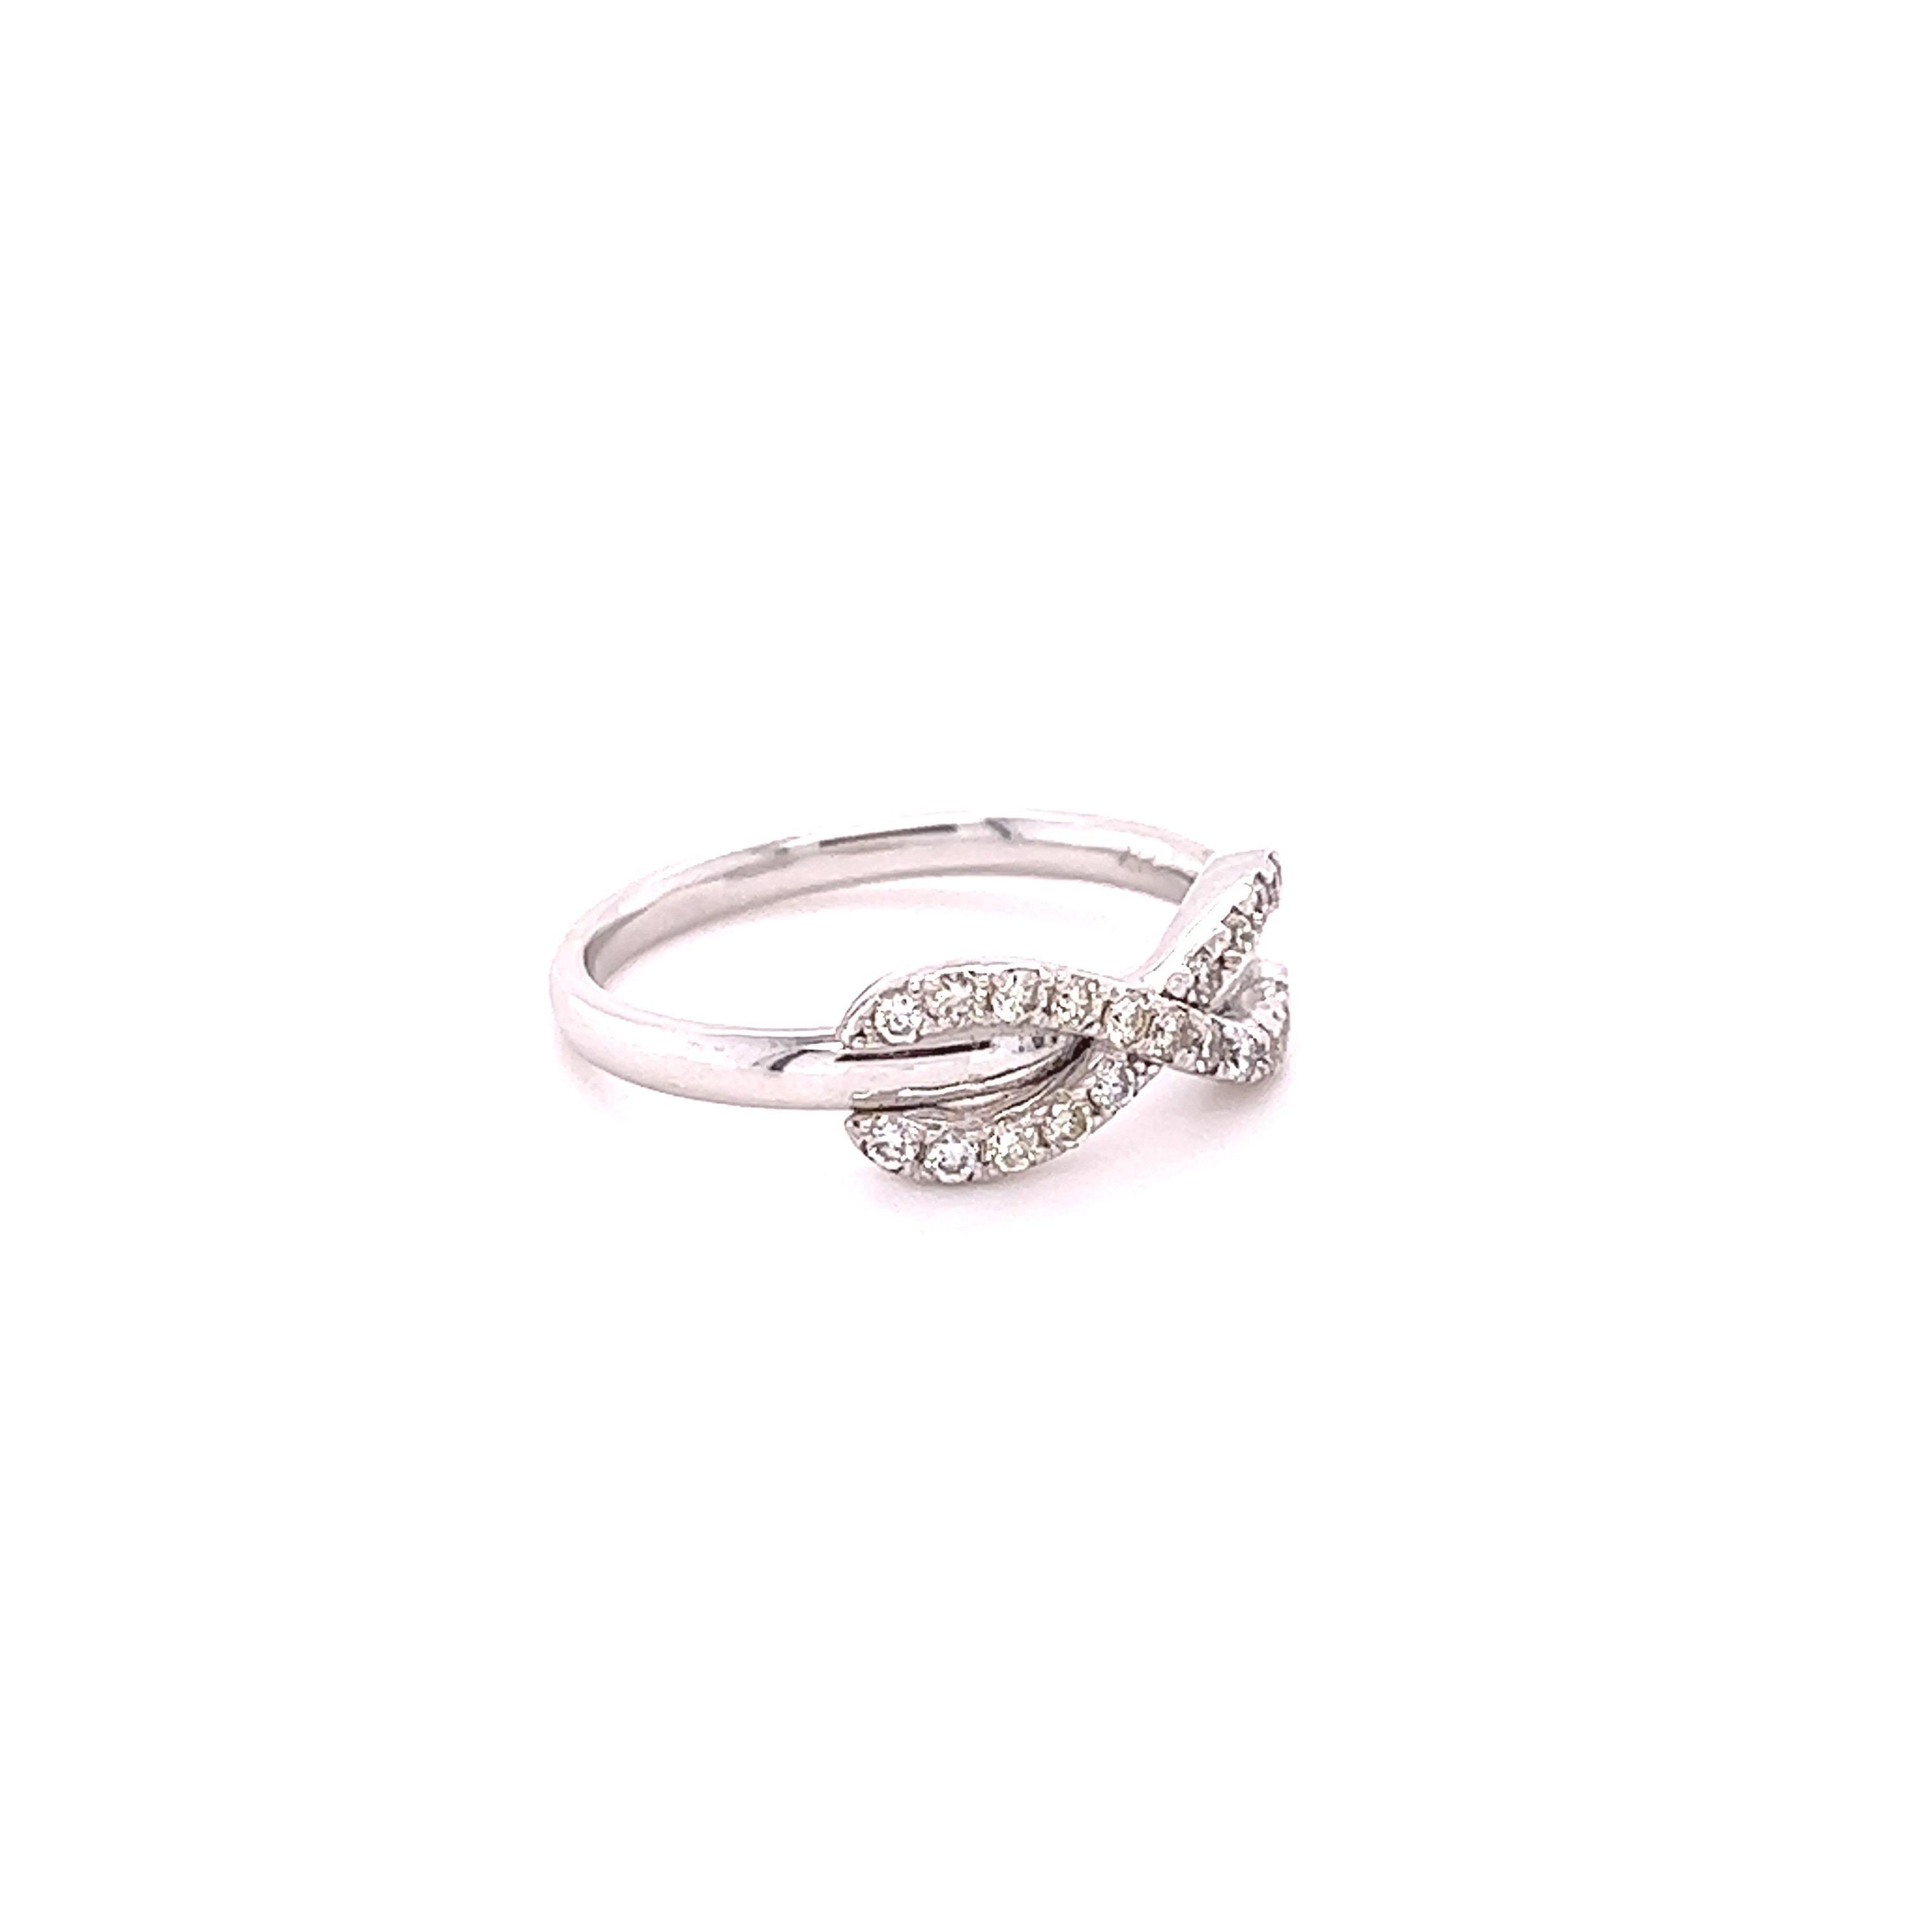 This ring has 21 Natural Round Cut Diamonds that weigh 0.29 carats. The clarity and color of the diamonds are SI1-H. 
The ring is set in 14 Karat White Gold with an approximate gold gram of 2.9 grams. 

It is a ring size 6.5 and can be re-sized free